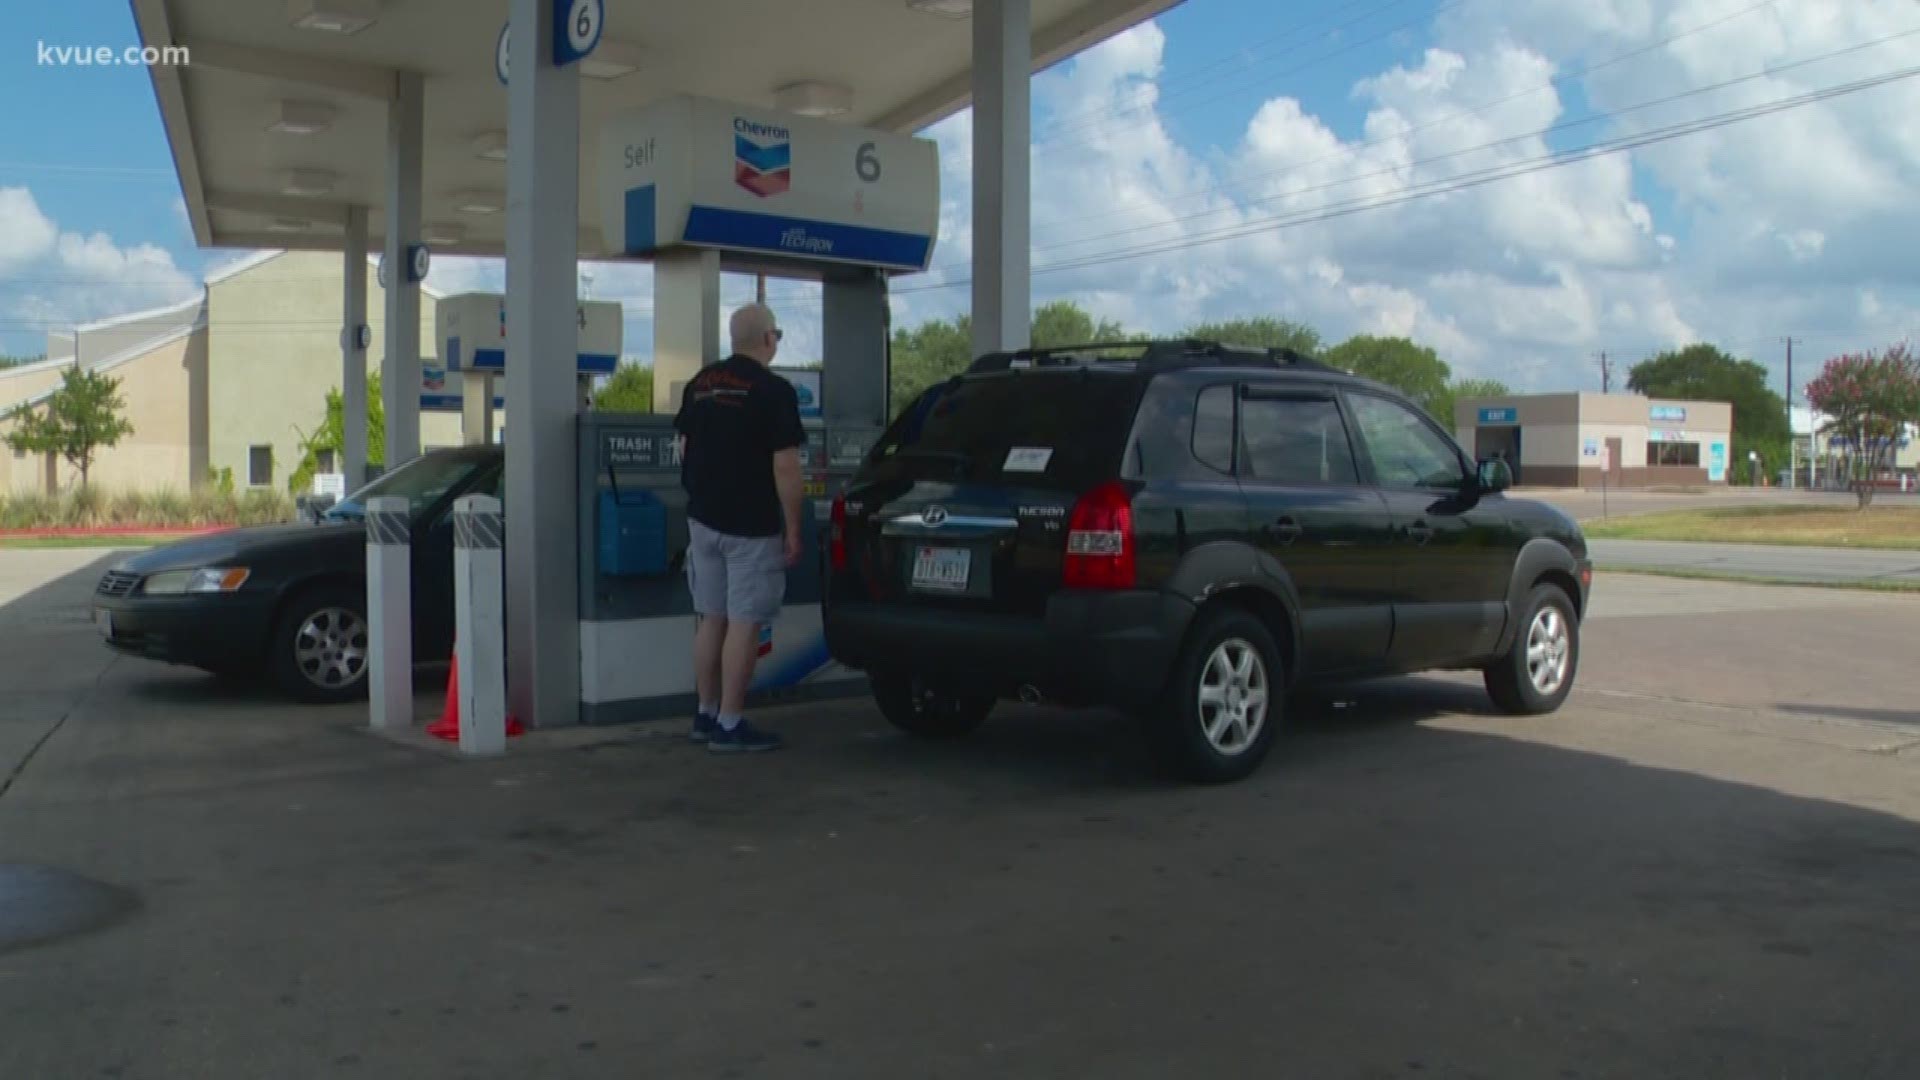 IF you were out of the road this weekend, you probably noticed gas prices were a little higher than before.